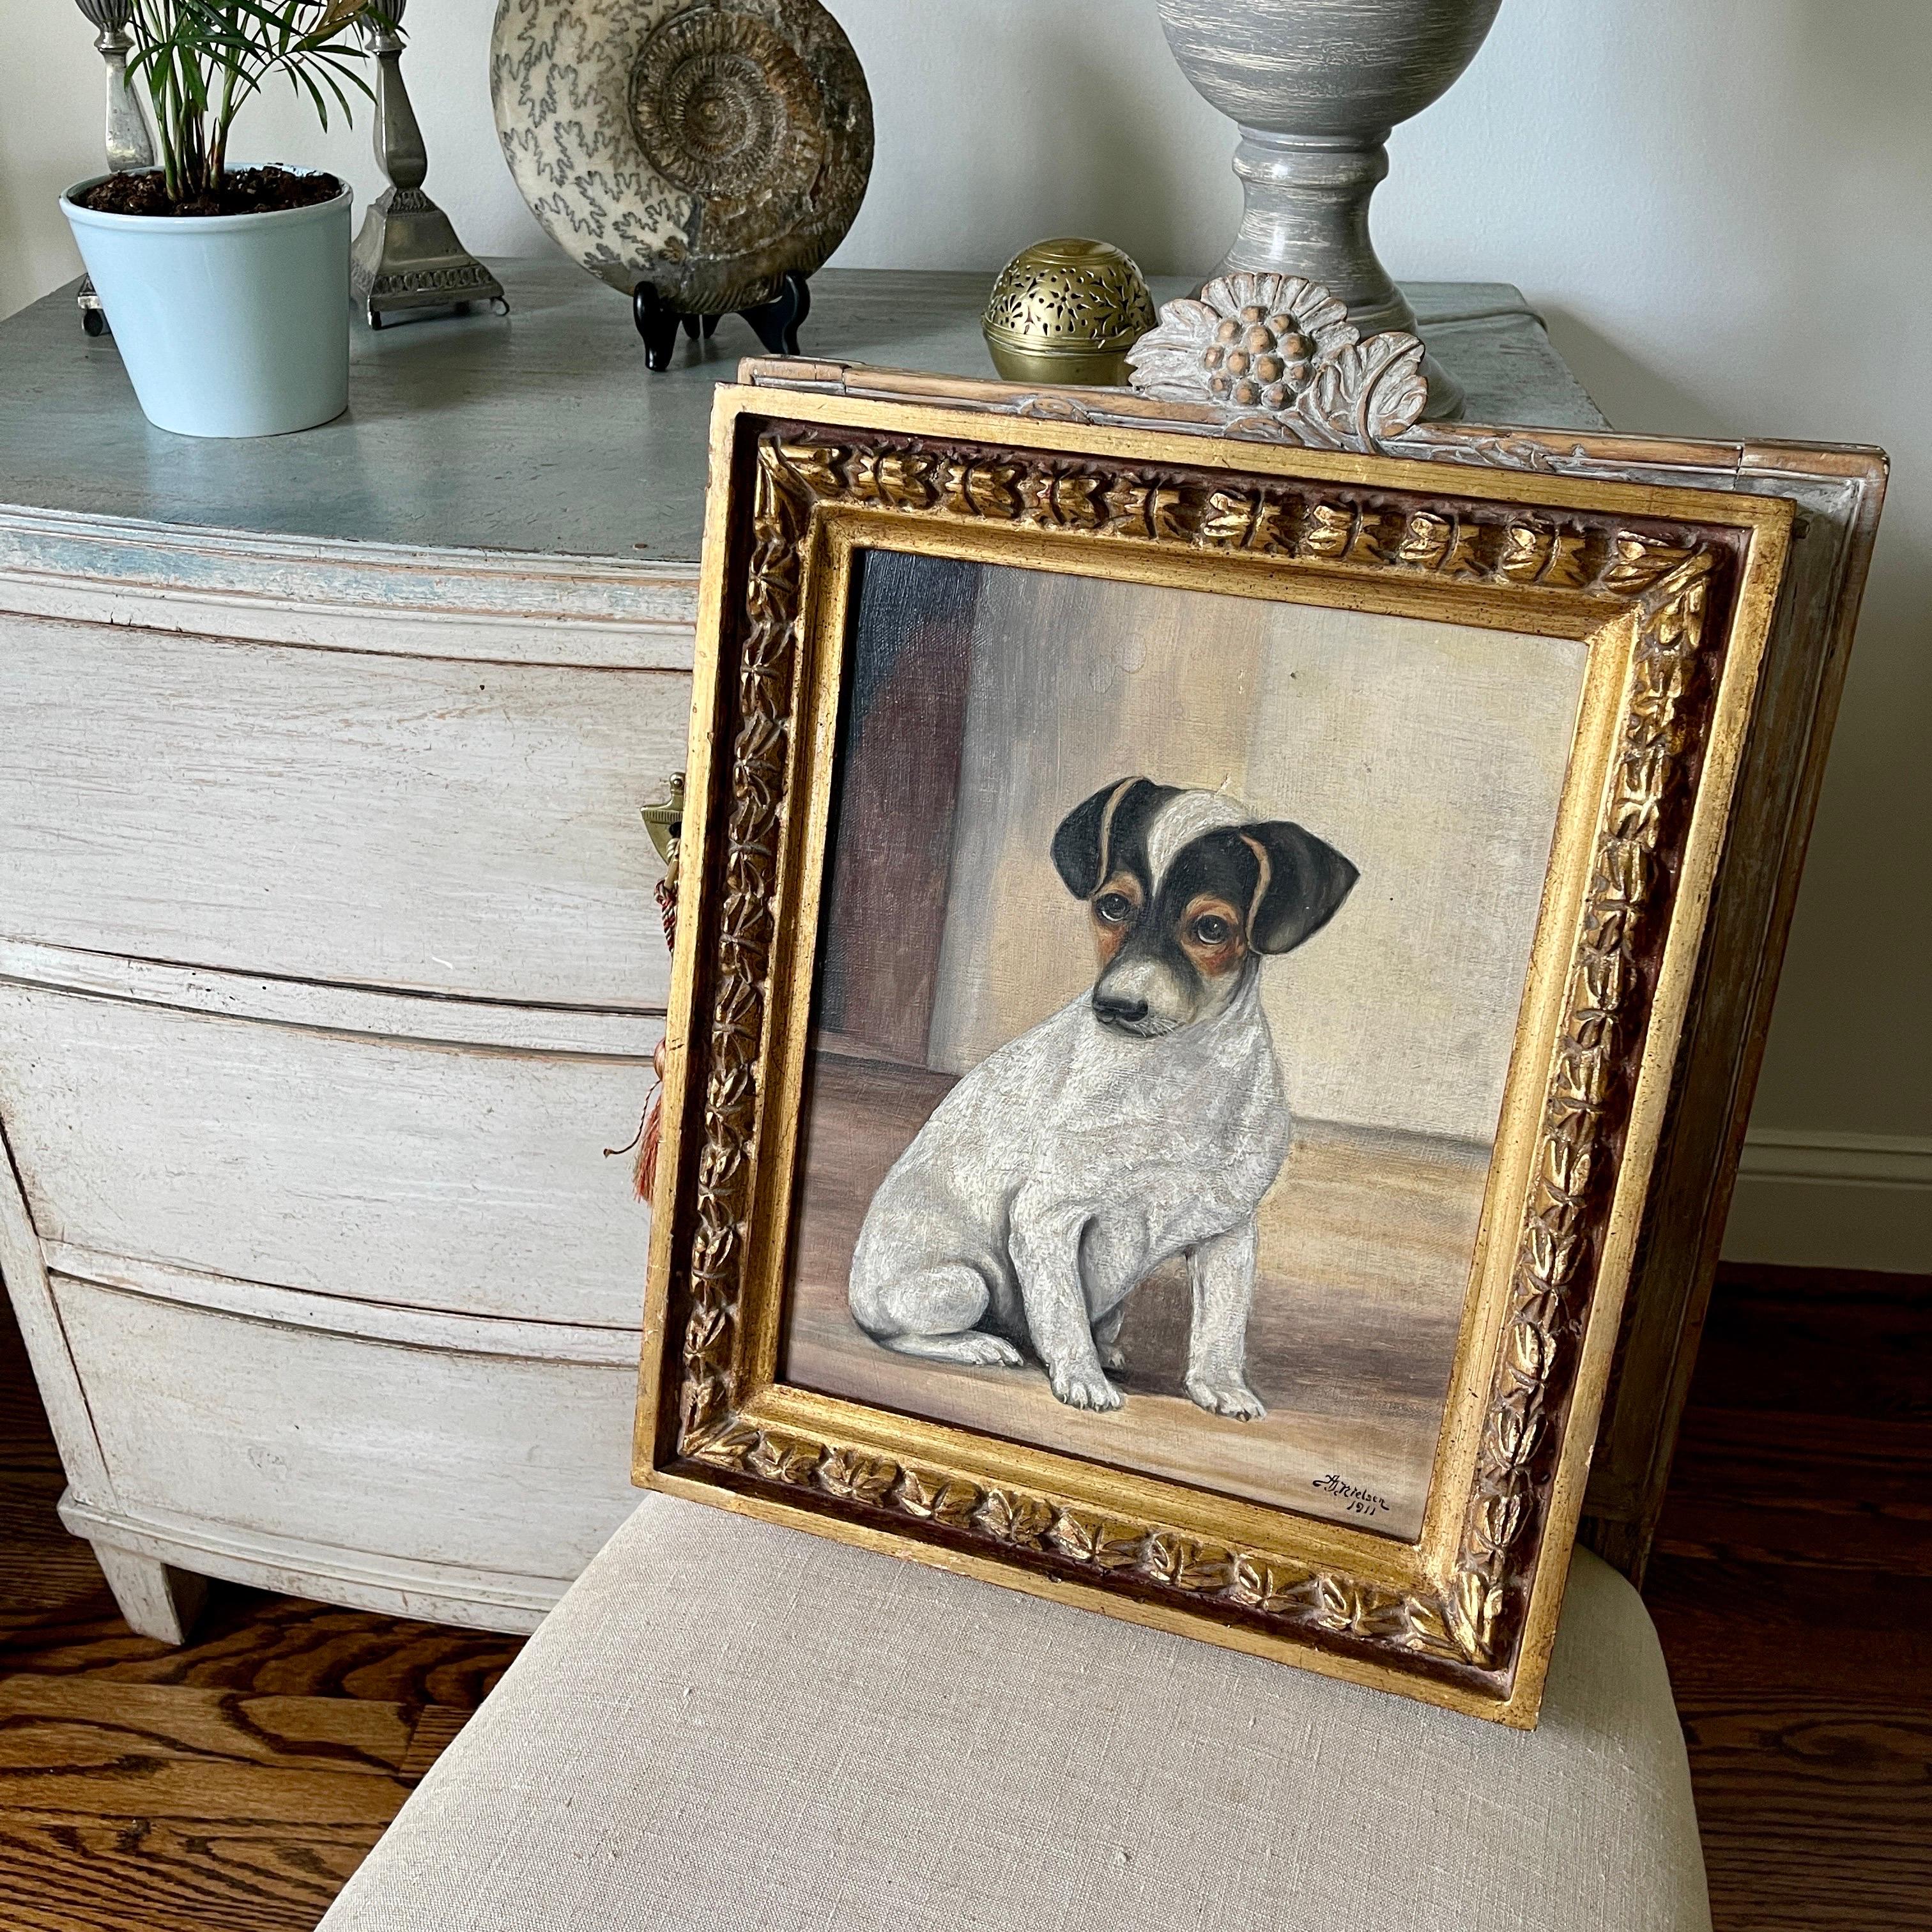 Amazing and Charming Painting of a Jack Russell Puppy Terrier, Denmark, Signed AJ Nielsen 1911. This charming and cute oil painting is framed in a later vintage 1950's frame. The rear of the frame has the sticker and markings of being in a